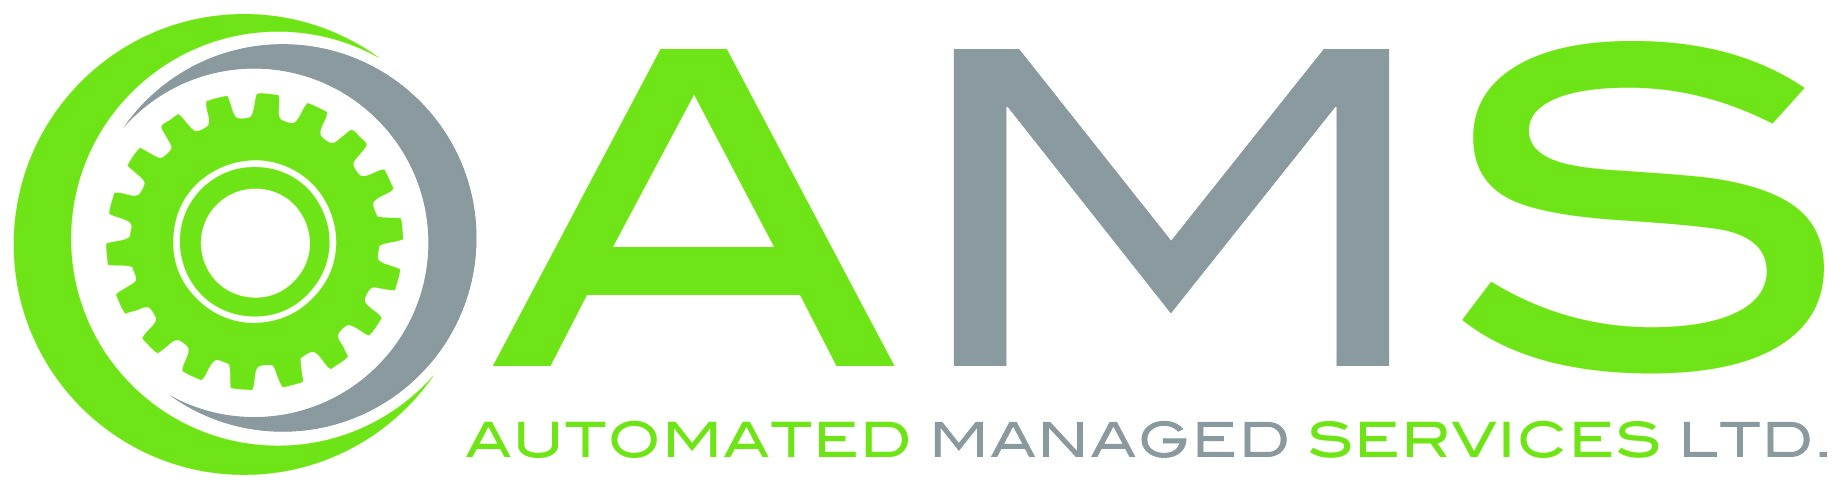 Automated Managed Services Ltd